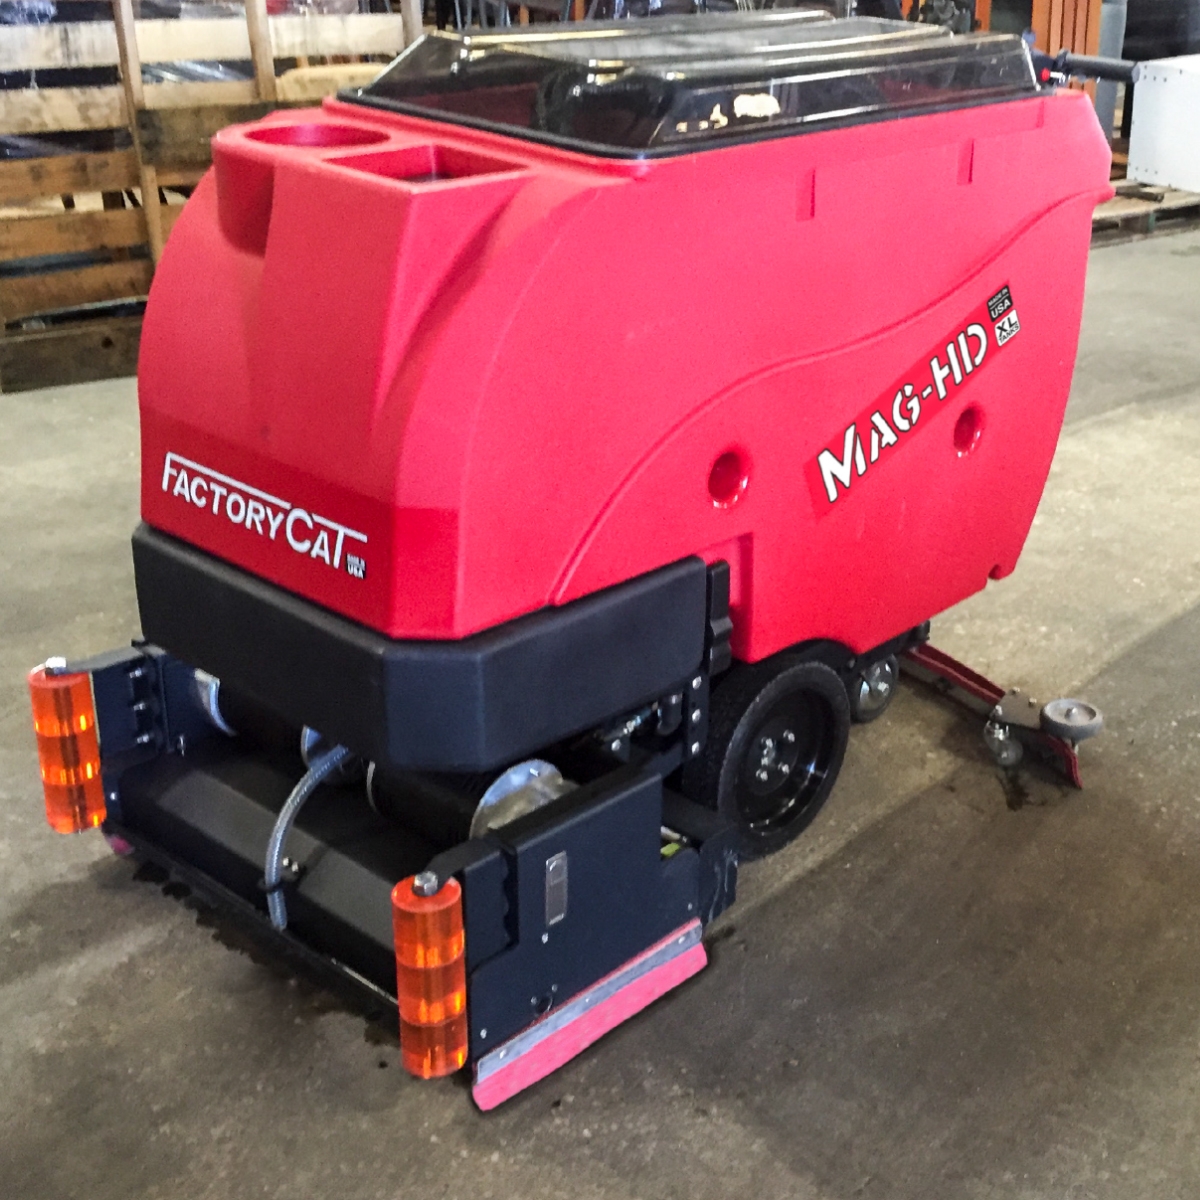 MAG-HD from Factory Cat and Southern Sweepers and Scrubbers Inc.  Equipped with scrub motors more powerful than others, and wide scrub path options, the Mag-HD will clean your floors better, and faster. Well balanced and very stable this machine is operator friendly and a pleasure to operate.